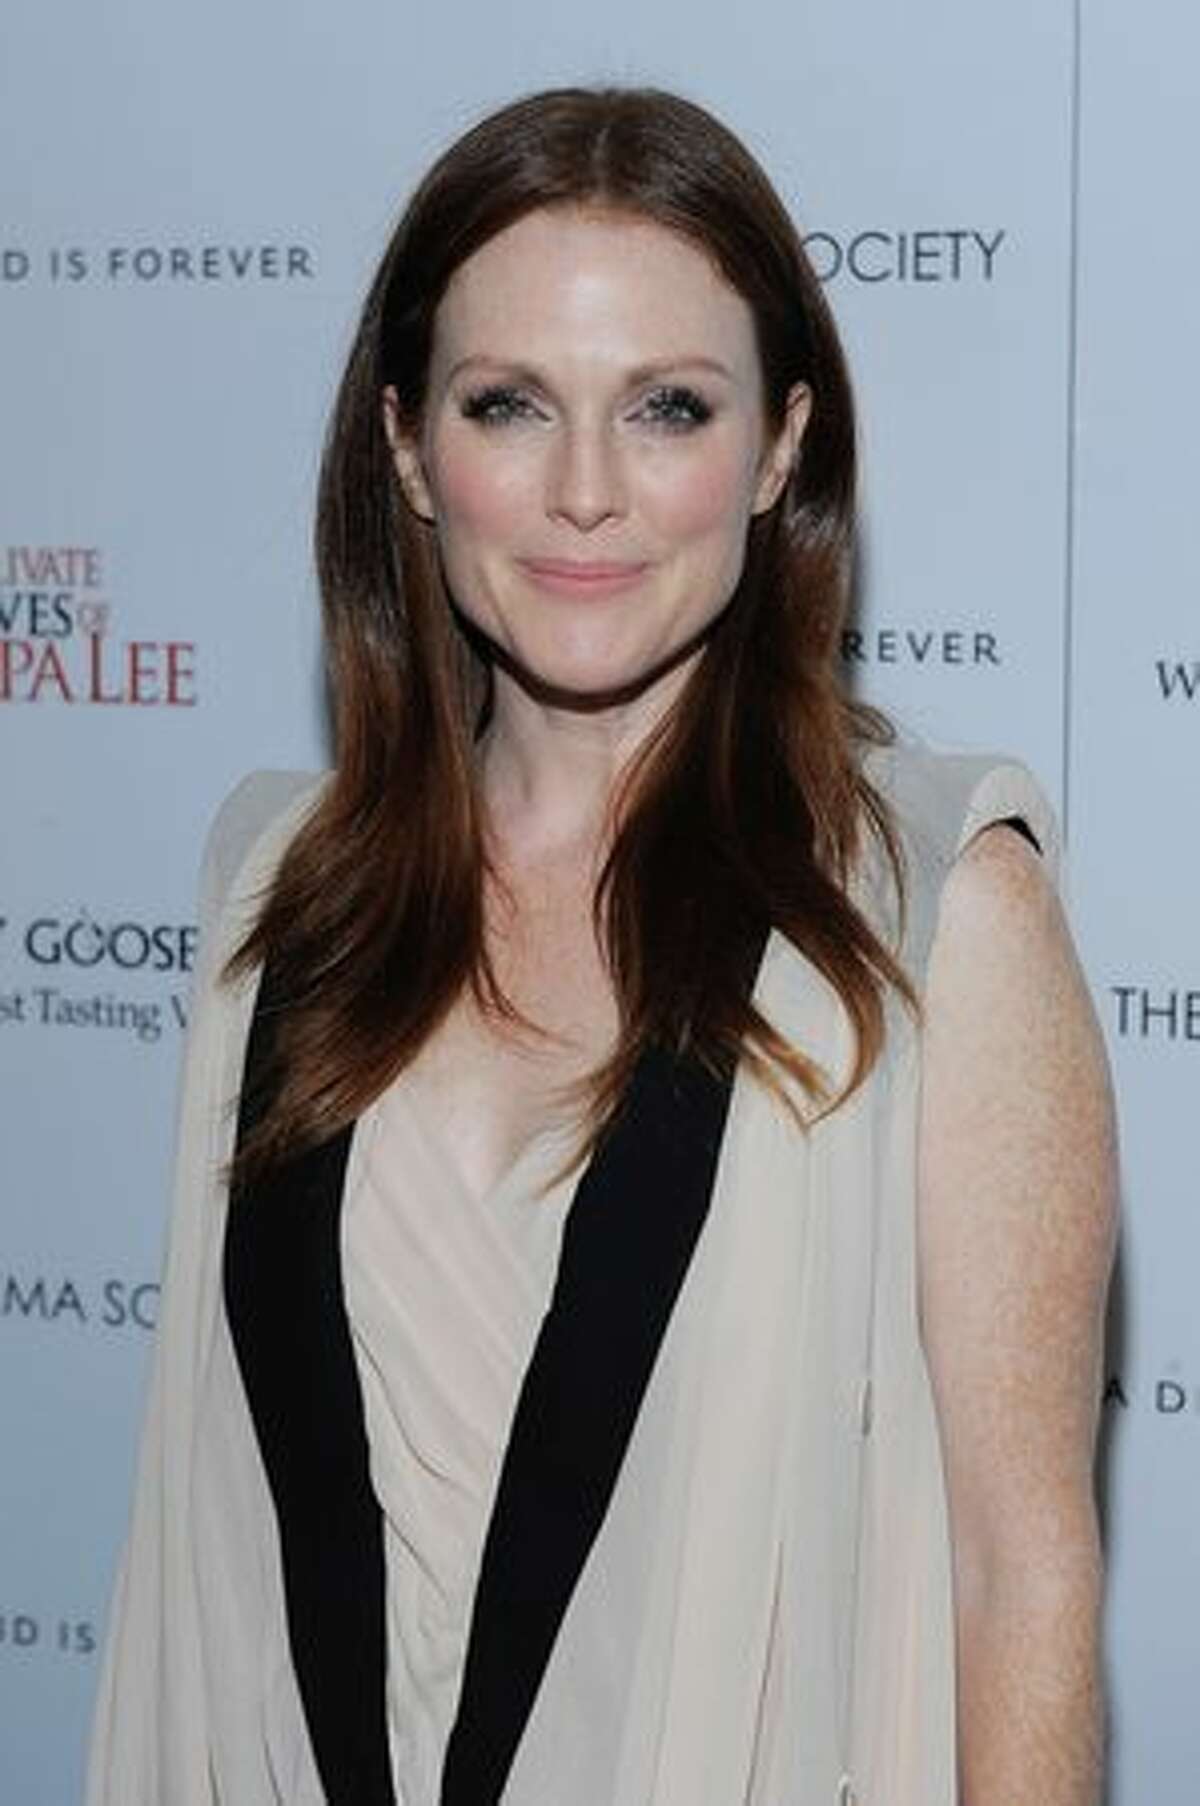 Actress Julianne Moore attends The Cinema Society & A Diamond is Forever screening of "The Private Lives of Pippa Lee" at AMC Loews 19th Street in New York City.